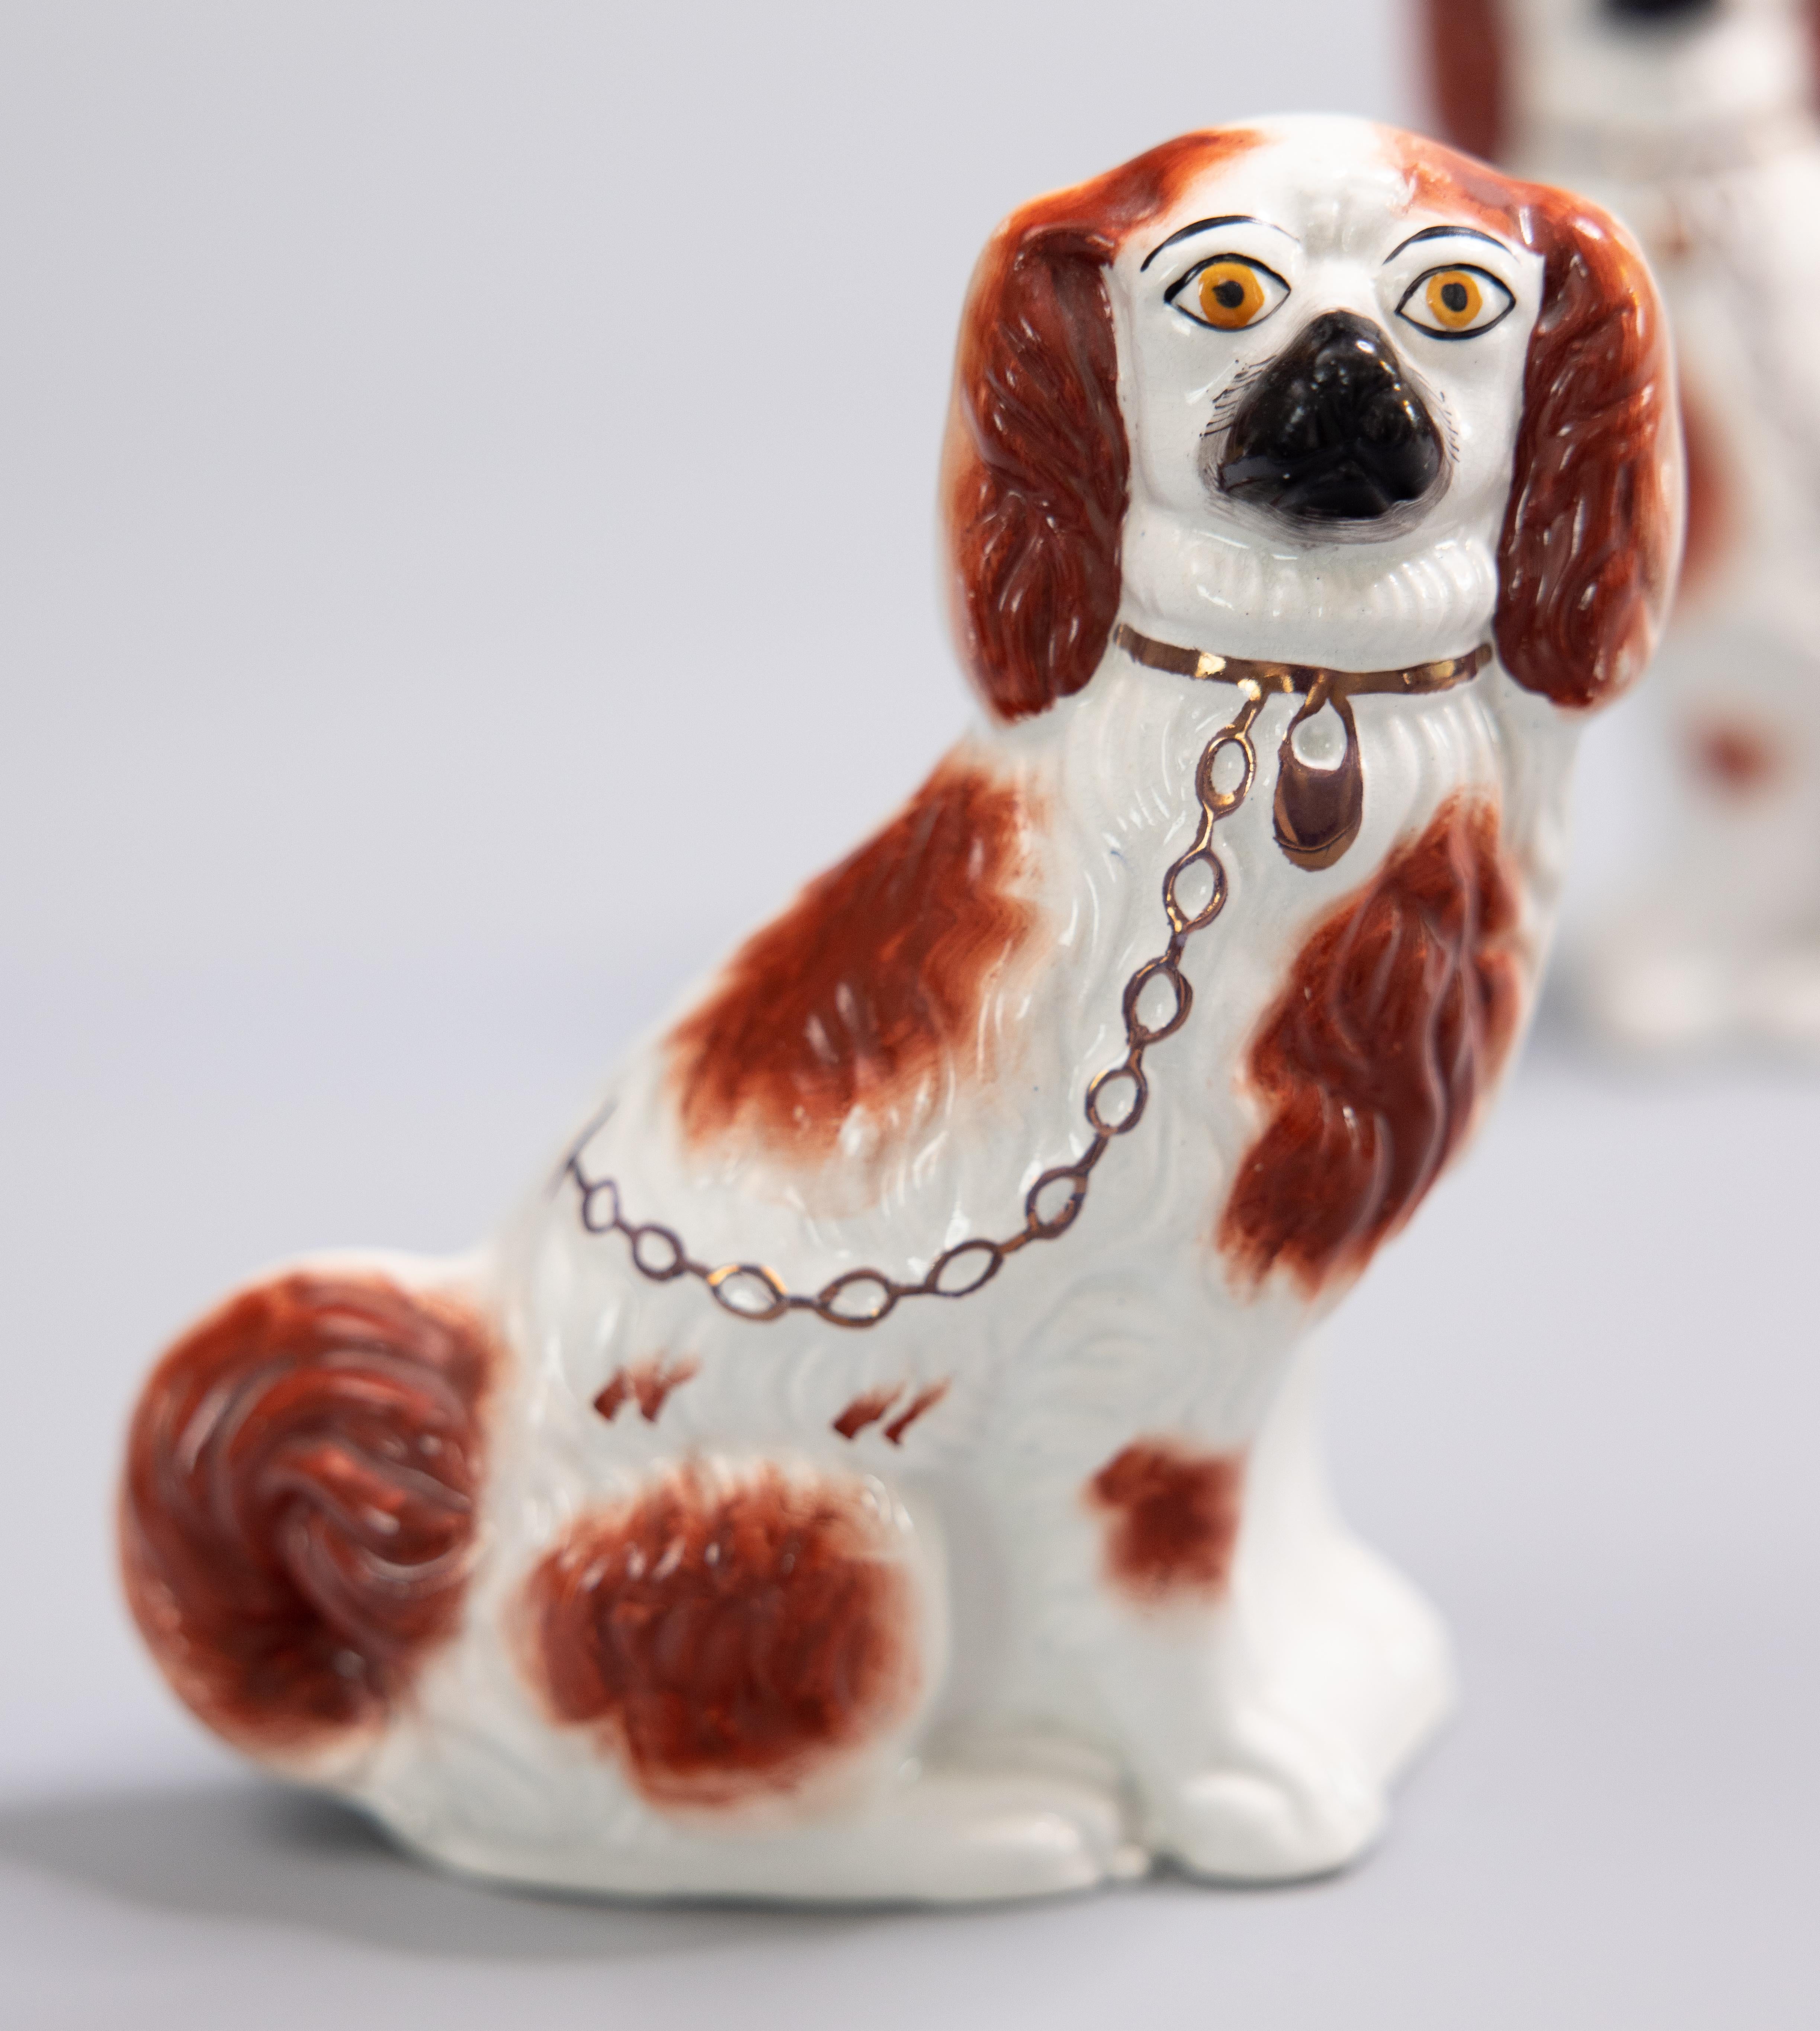 A superb pair of antique 19th-century English Staffordshire russet spaniel dogs. These charming dogs are hand painted with beautiful details, gilt accents, and the sweetest expressions. They are the perfect Victorian pair of dogs for your mantel,